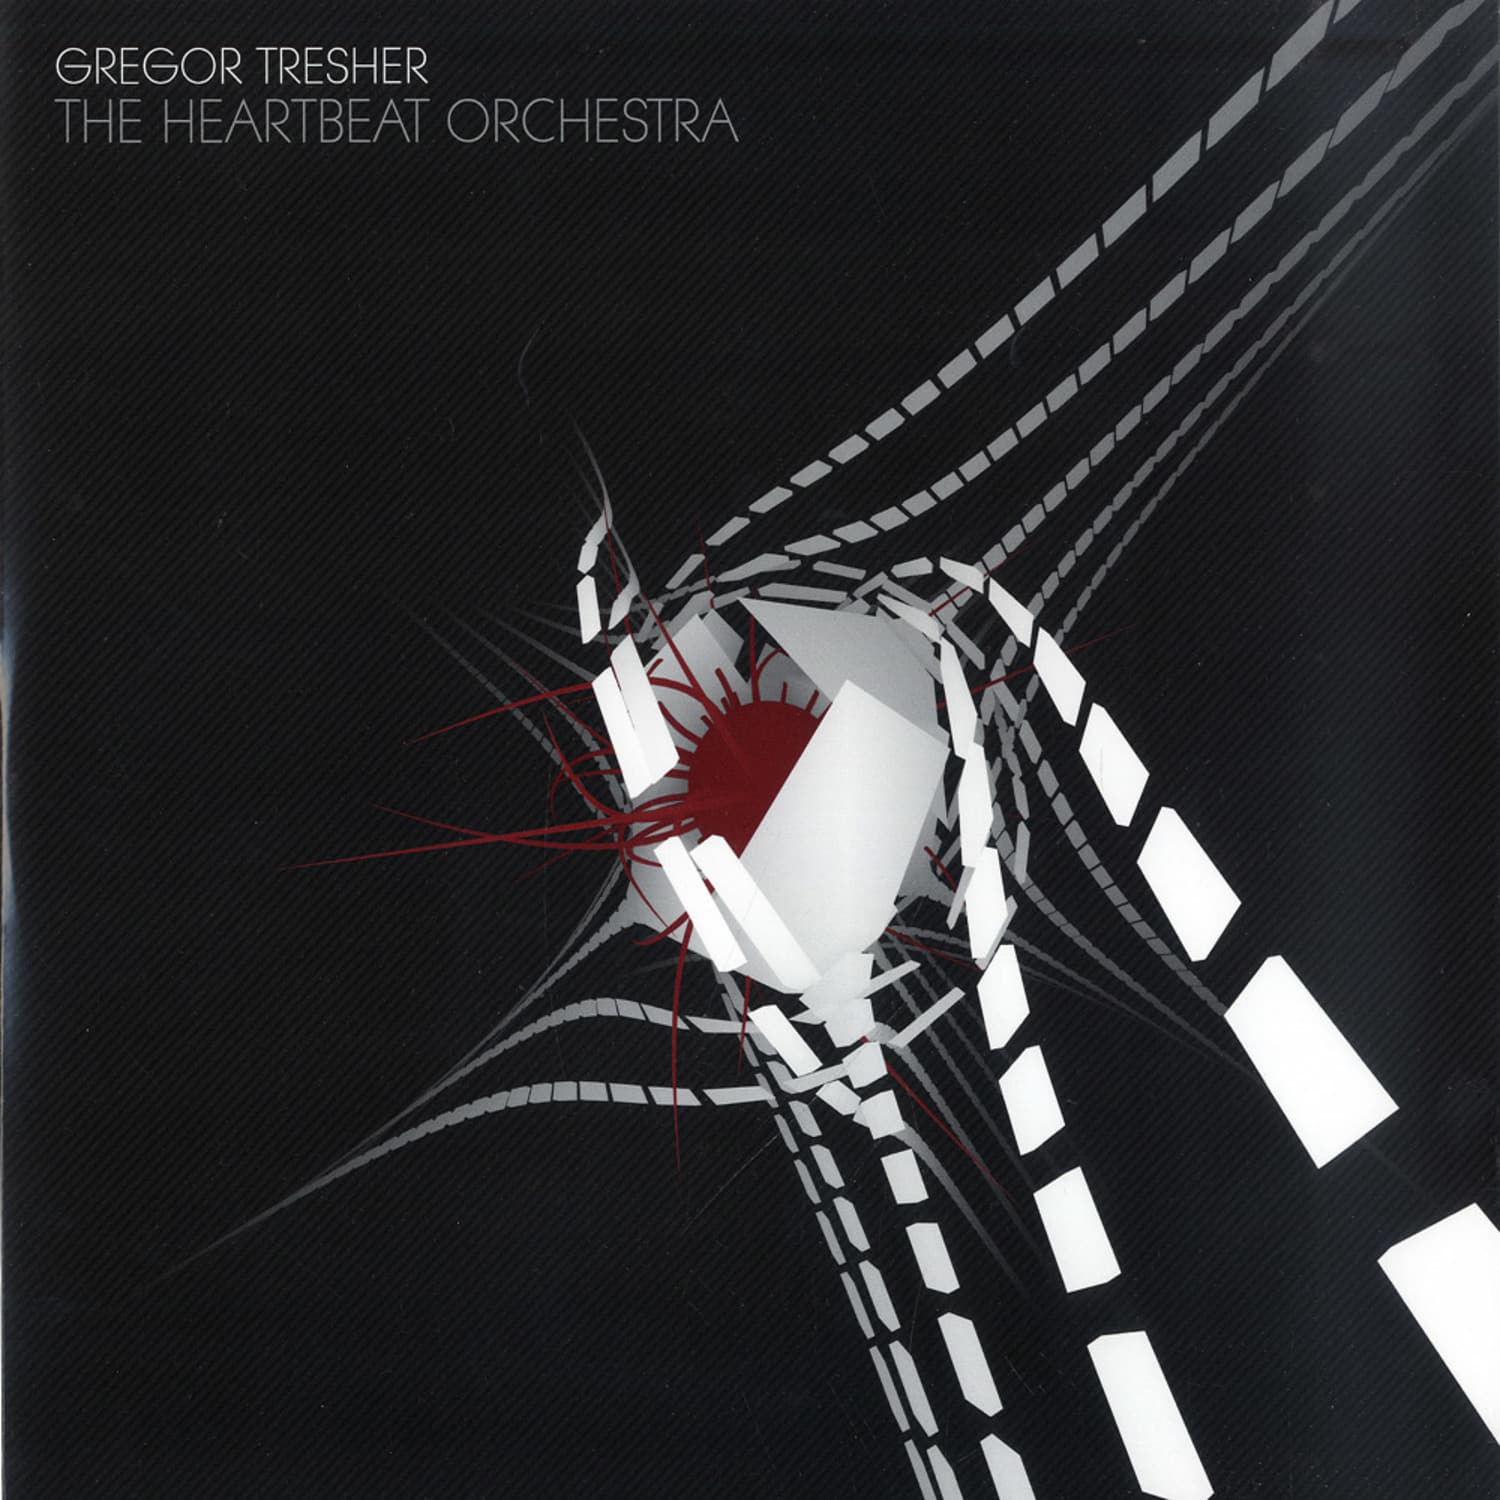 Gregor Tresher - THE HEARTBEAT ORCHESTRA